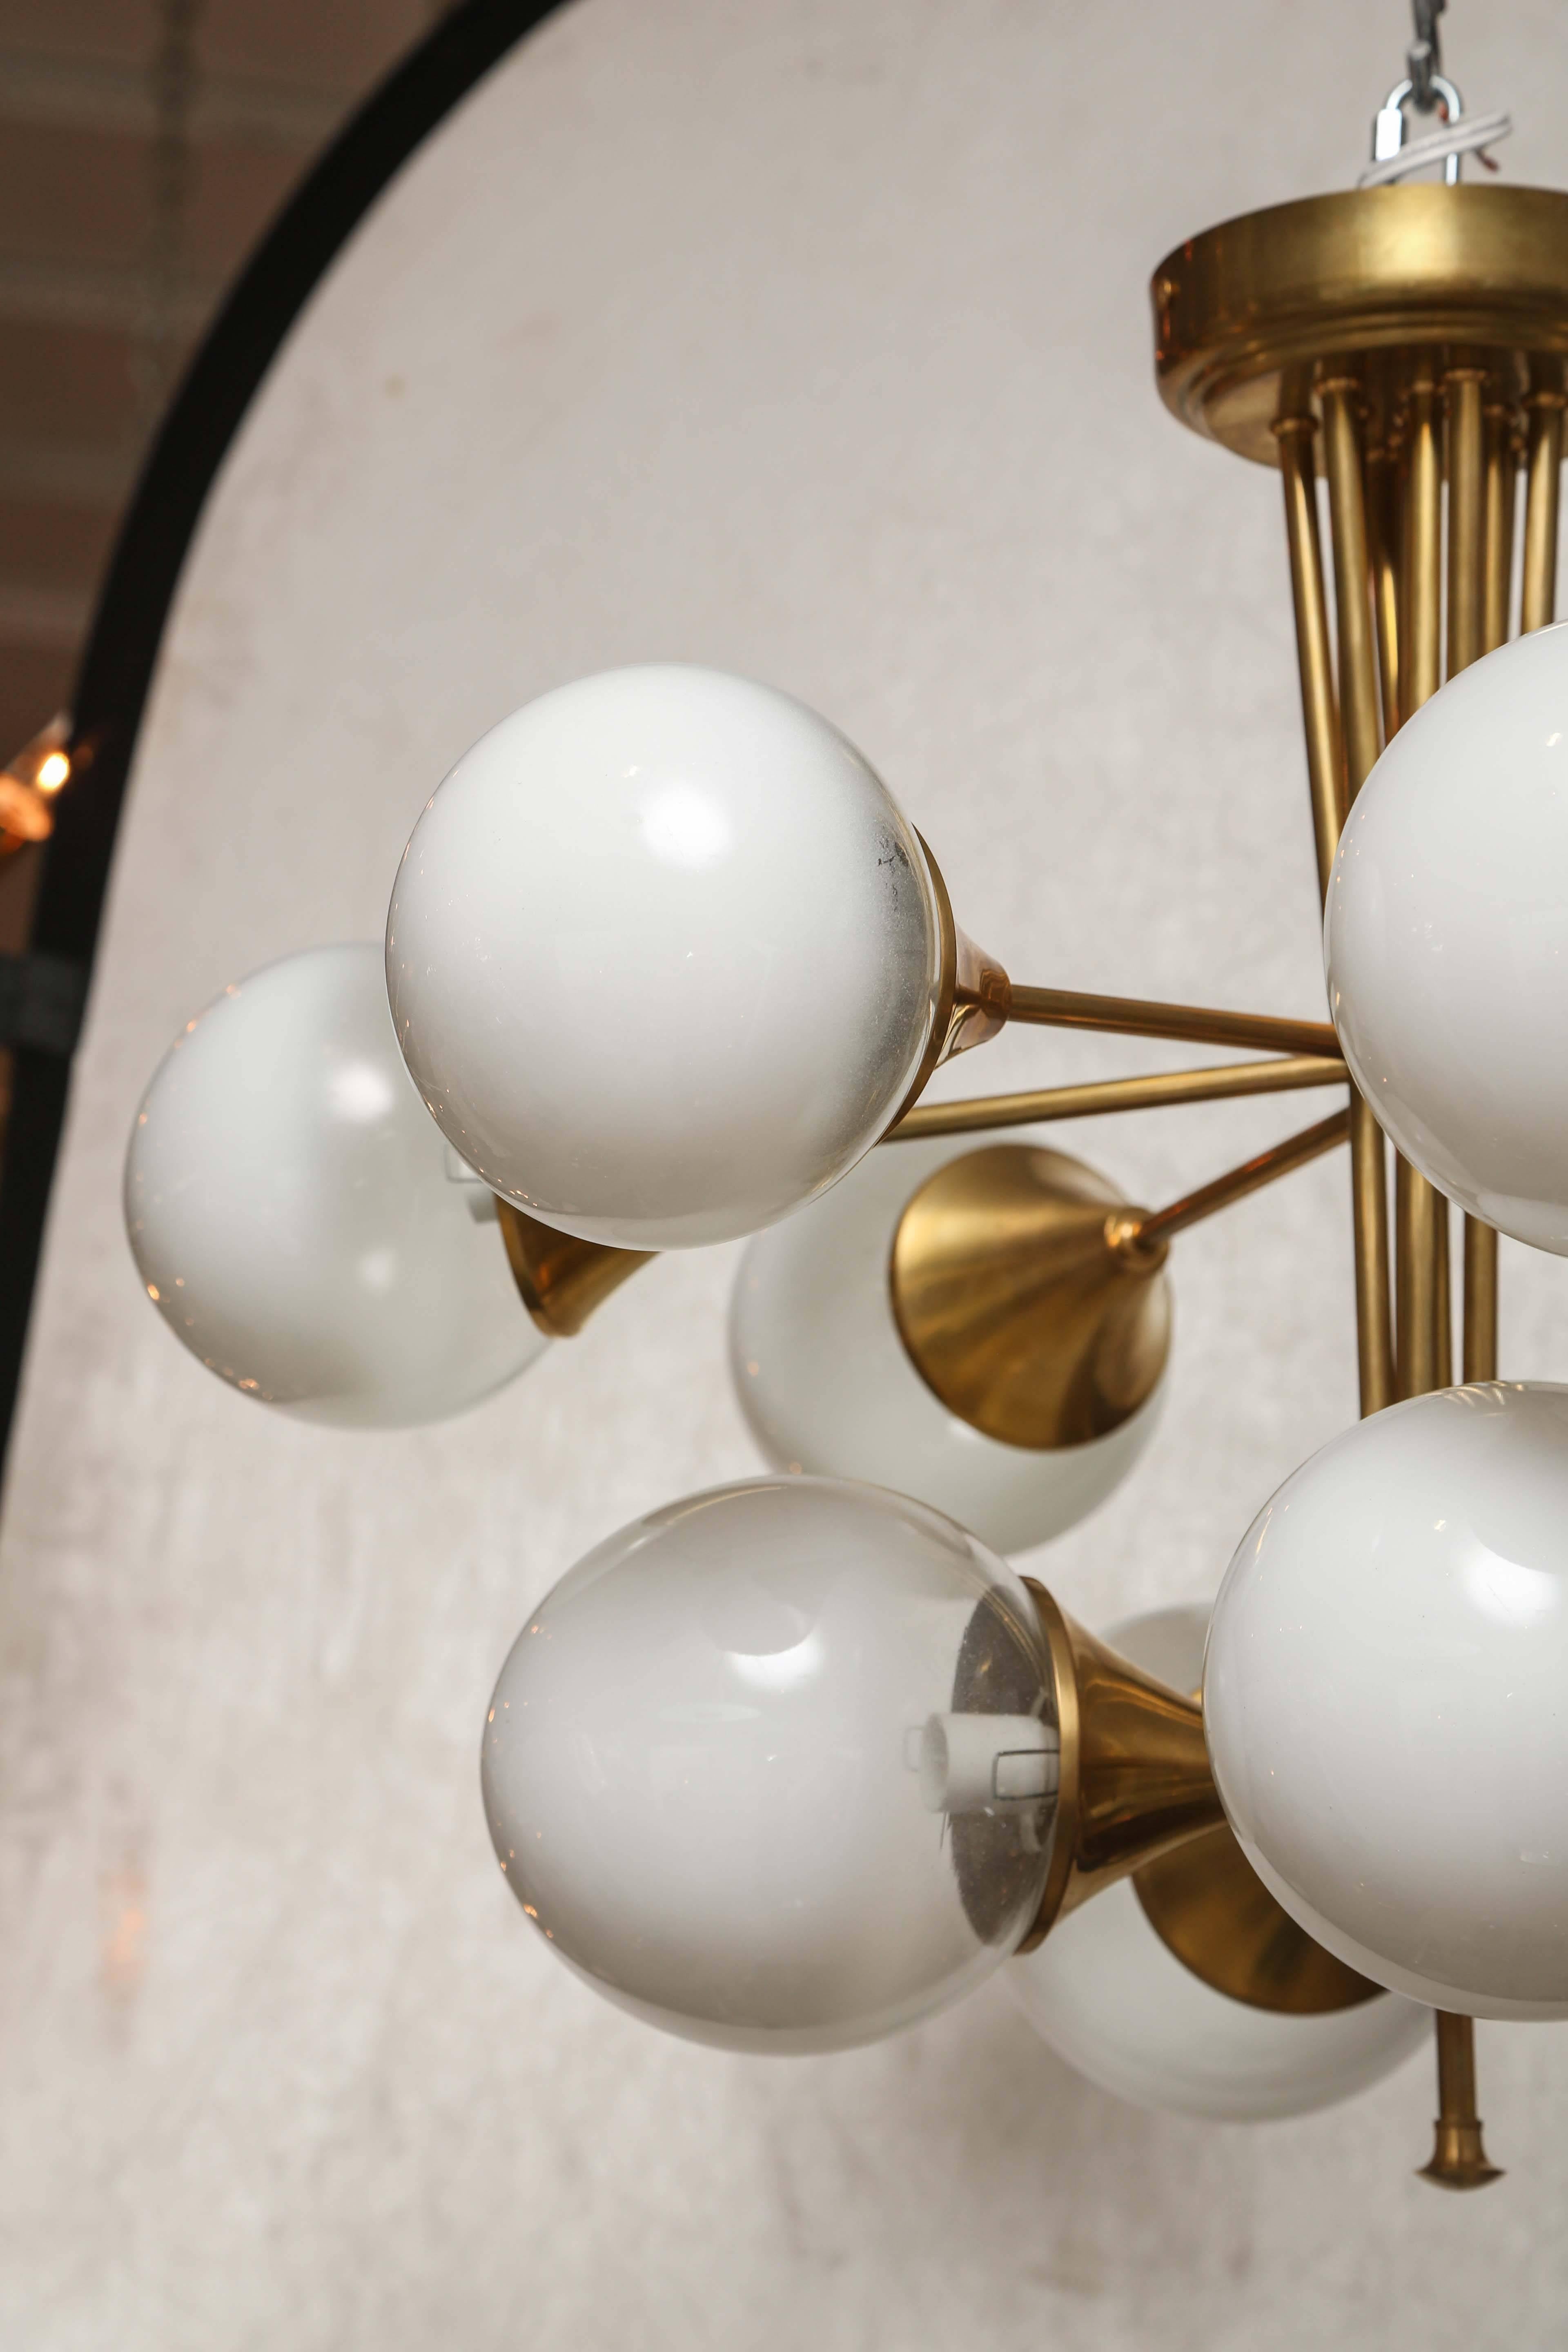 Retro variation on a traditional Sputnik this fixture has brass armature with ten satin glass heads projecting from central stem.